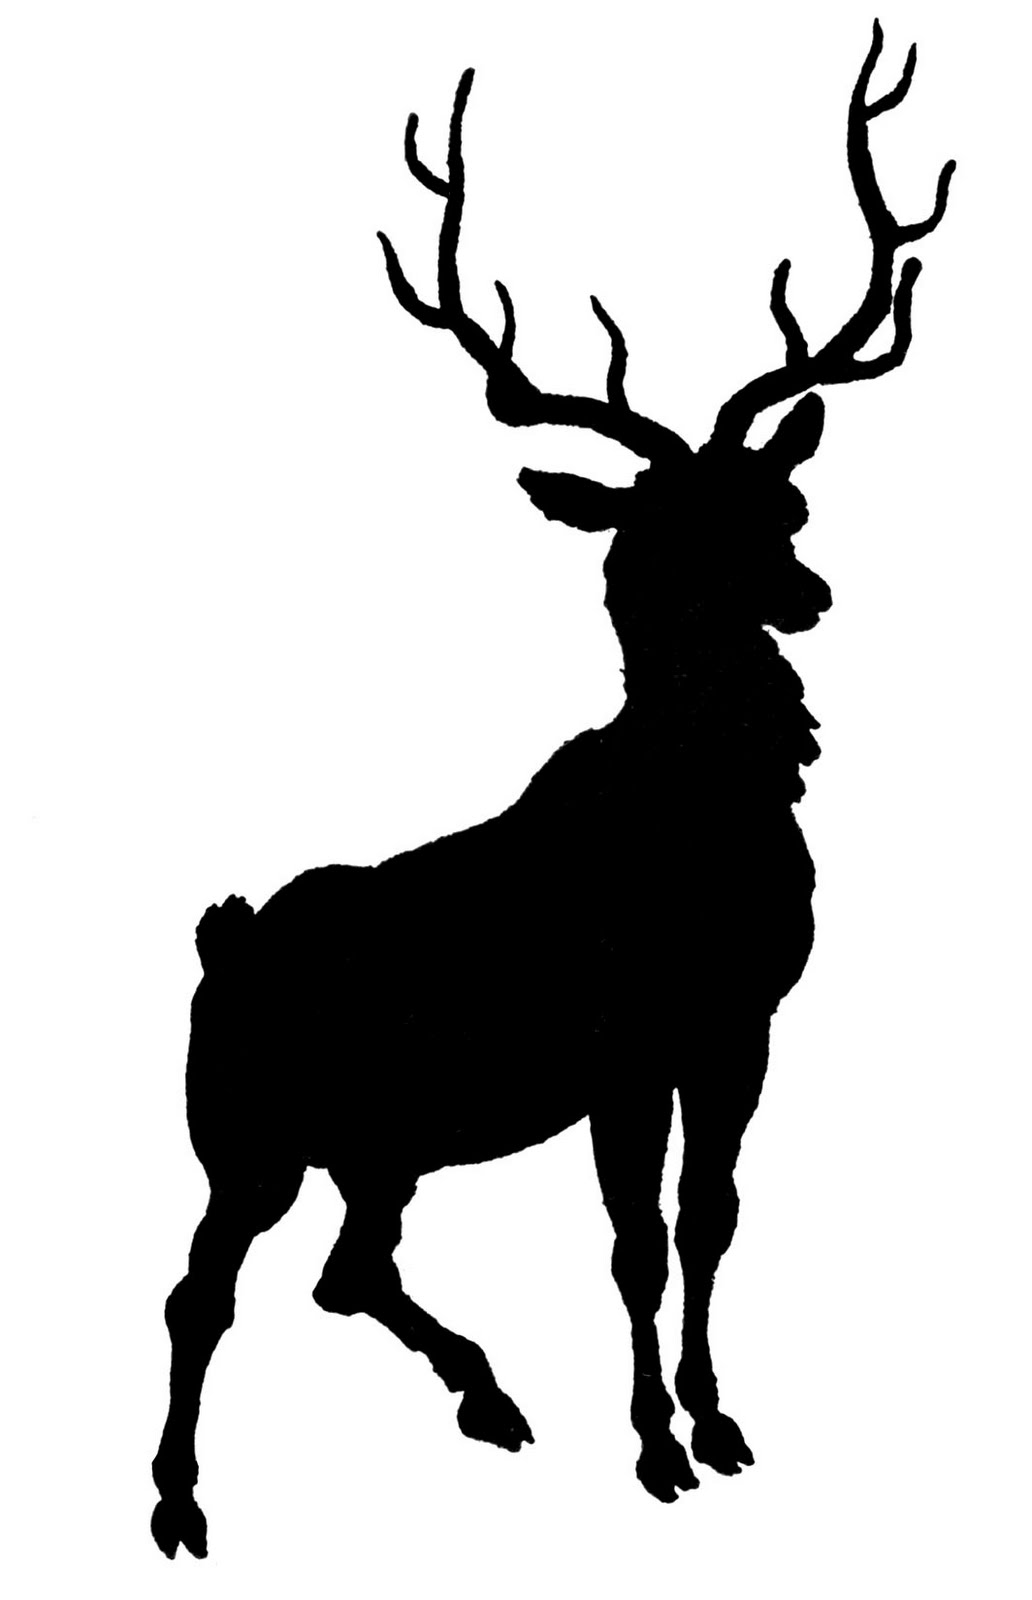 Deer with antlers silhouette clipart vector free